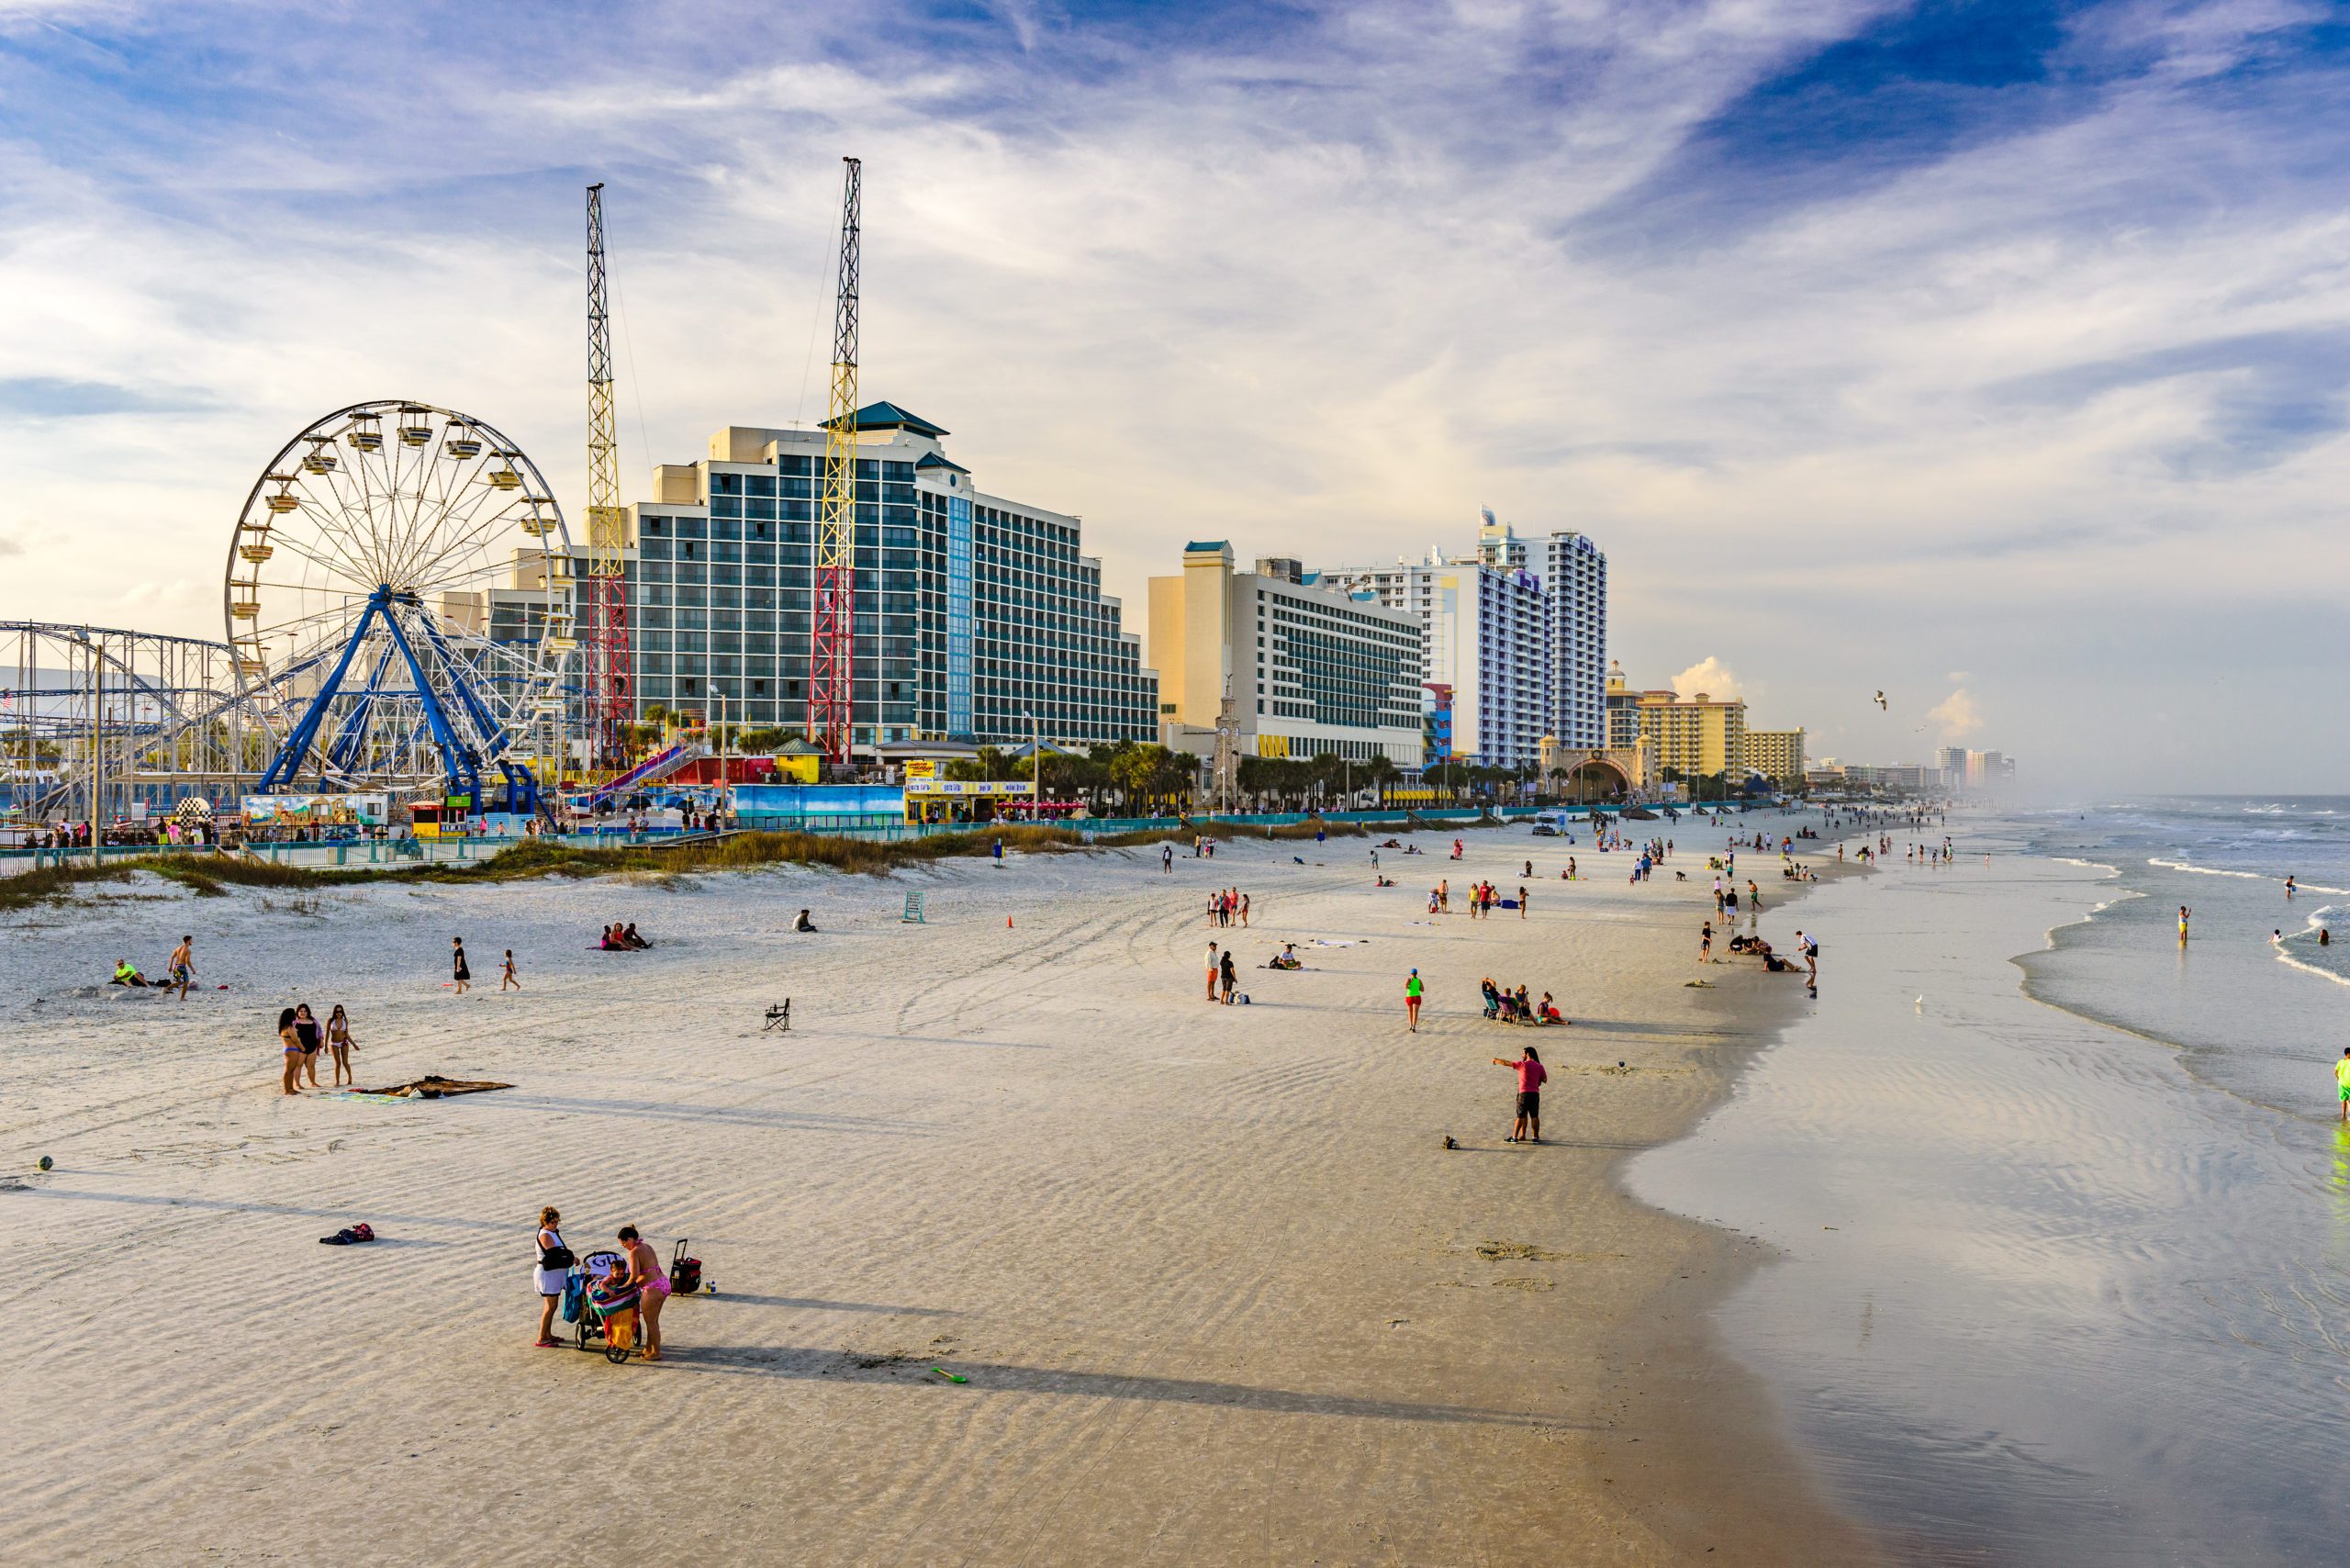 How To Get From Orlando To Daytona Beach The Family Vacation Guide